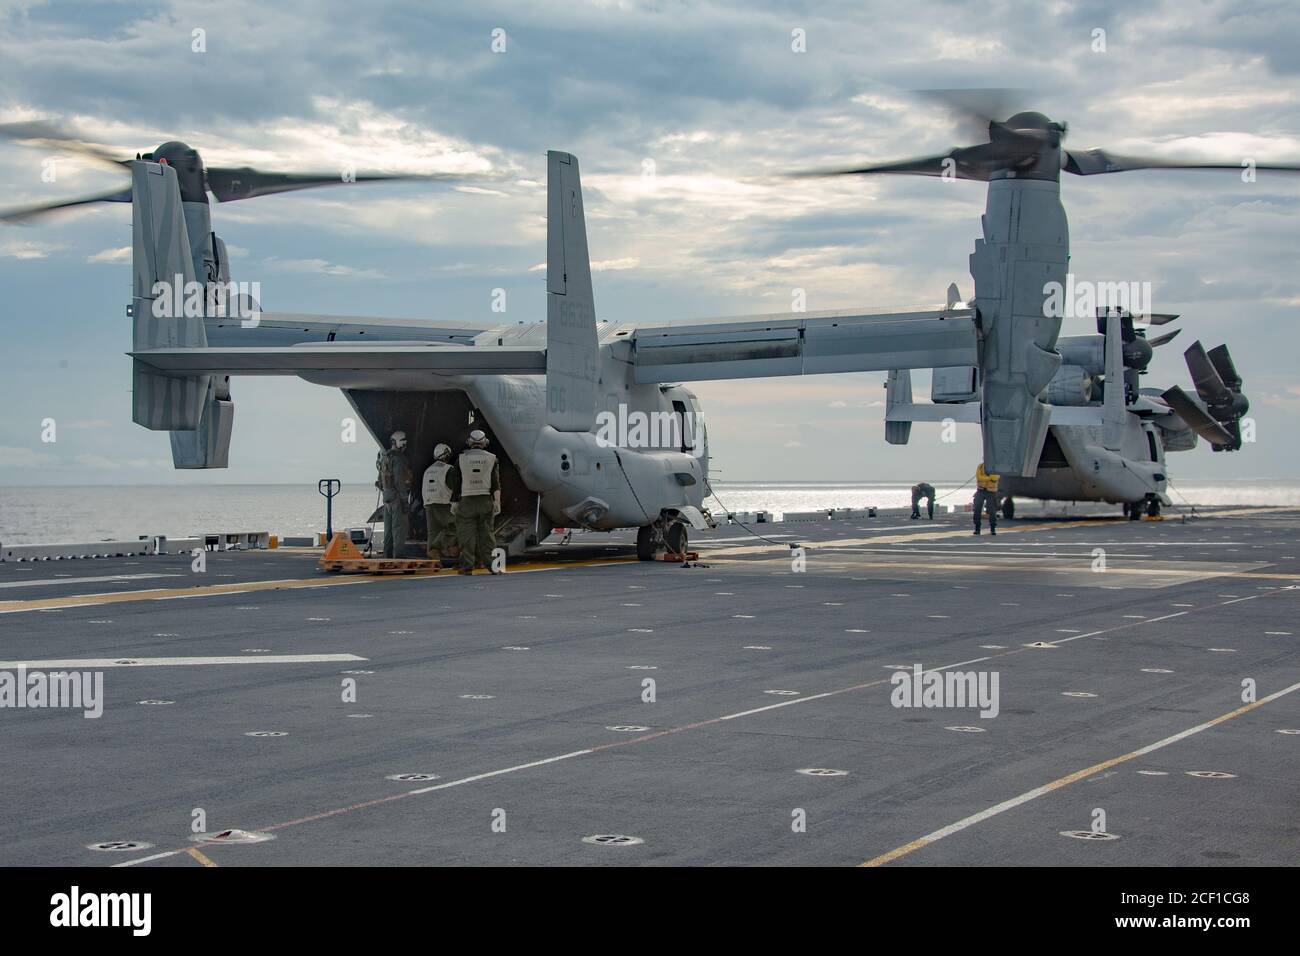 PHILIPPINE SEA (Sep. 2, 2020) Marines with the Forward Command Element (FCE), 31st Marine Expeditionary Unit (MEU), board a MV-22B Osprey with Marine Medium Tiltrotor Squadron 262 (Reinforced) for an embassy reinforcement drill, aboard amphibious assault ship USS America (LHA 6). The FCE is prepared to deploy to U.S. embassies in the region in order to establish communication and coordination with the MEU for follow on missions. The America, flagship of the America Amphibious Ready Group, 31st MEU team, is operating in the U.S. 7th Fleet area of operations to enhance interoperability with alli Stock Photo